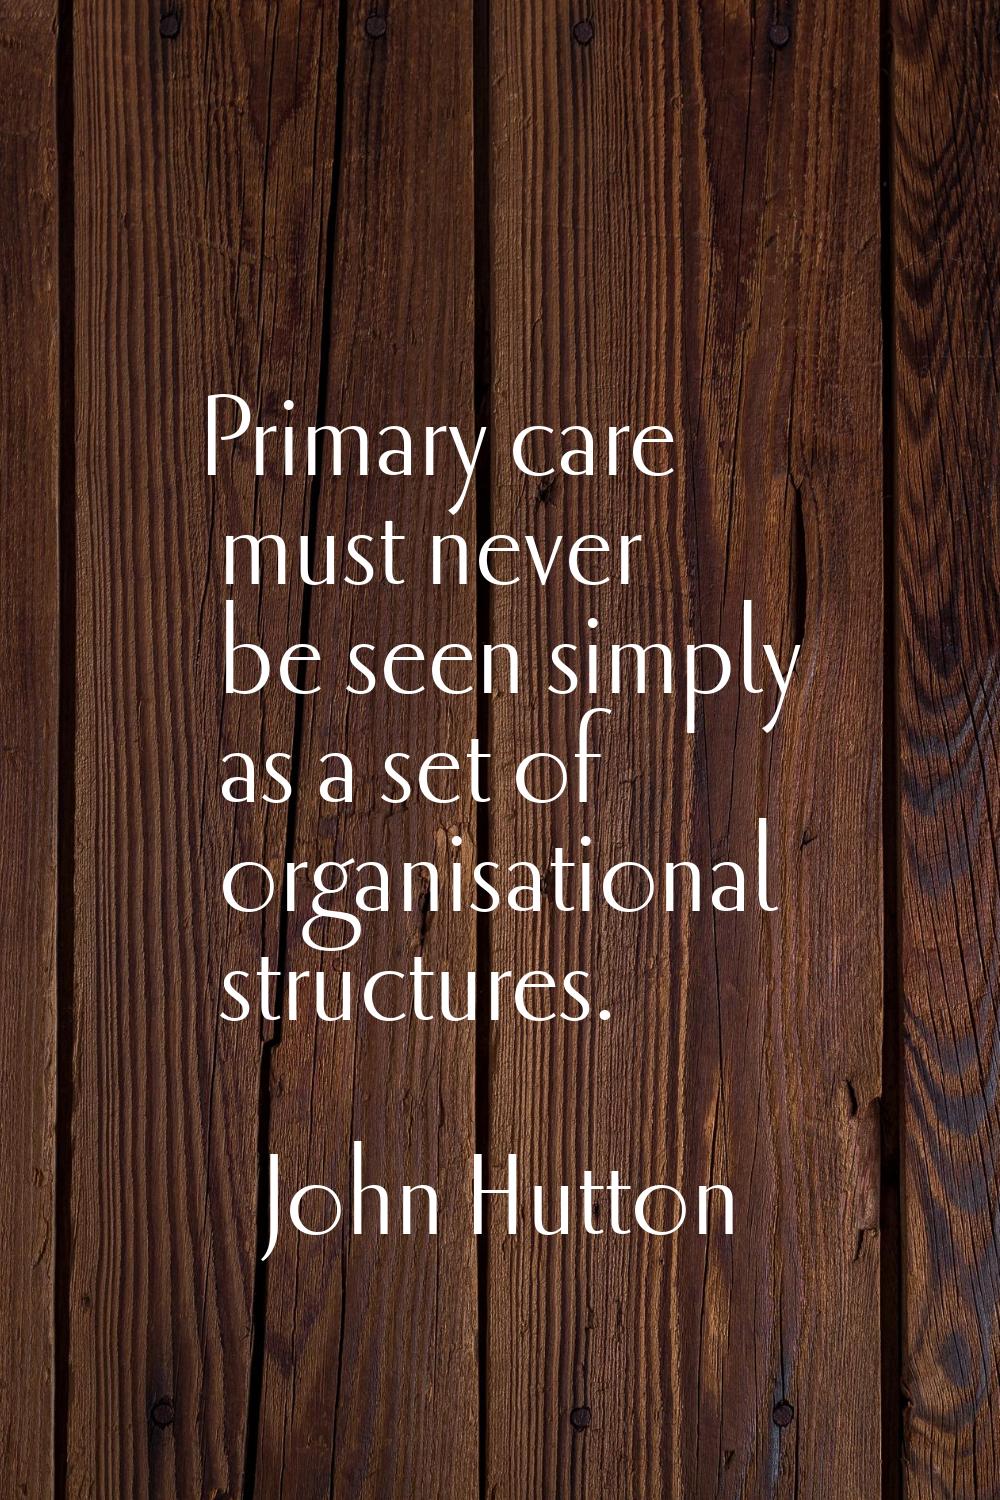 Primary care must never be seen simply as a set of organisational structures.